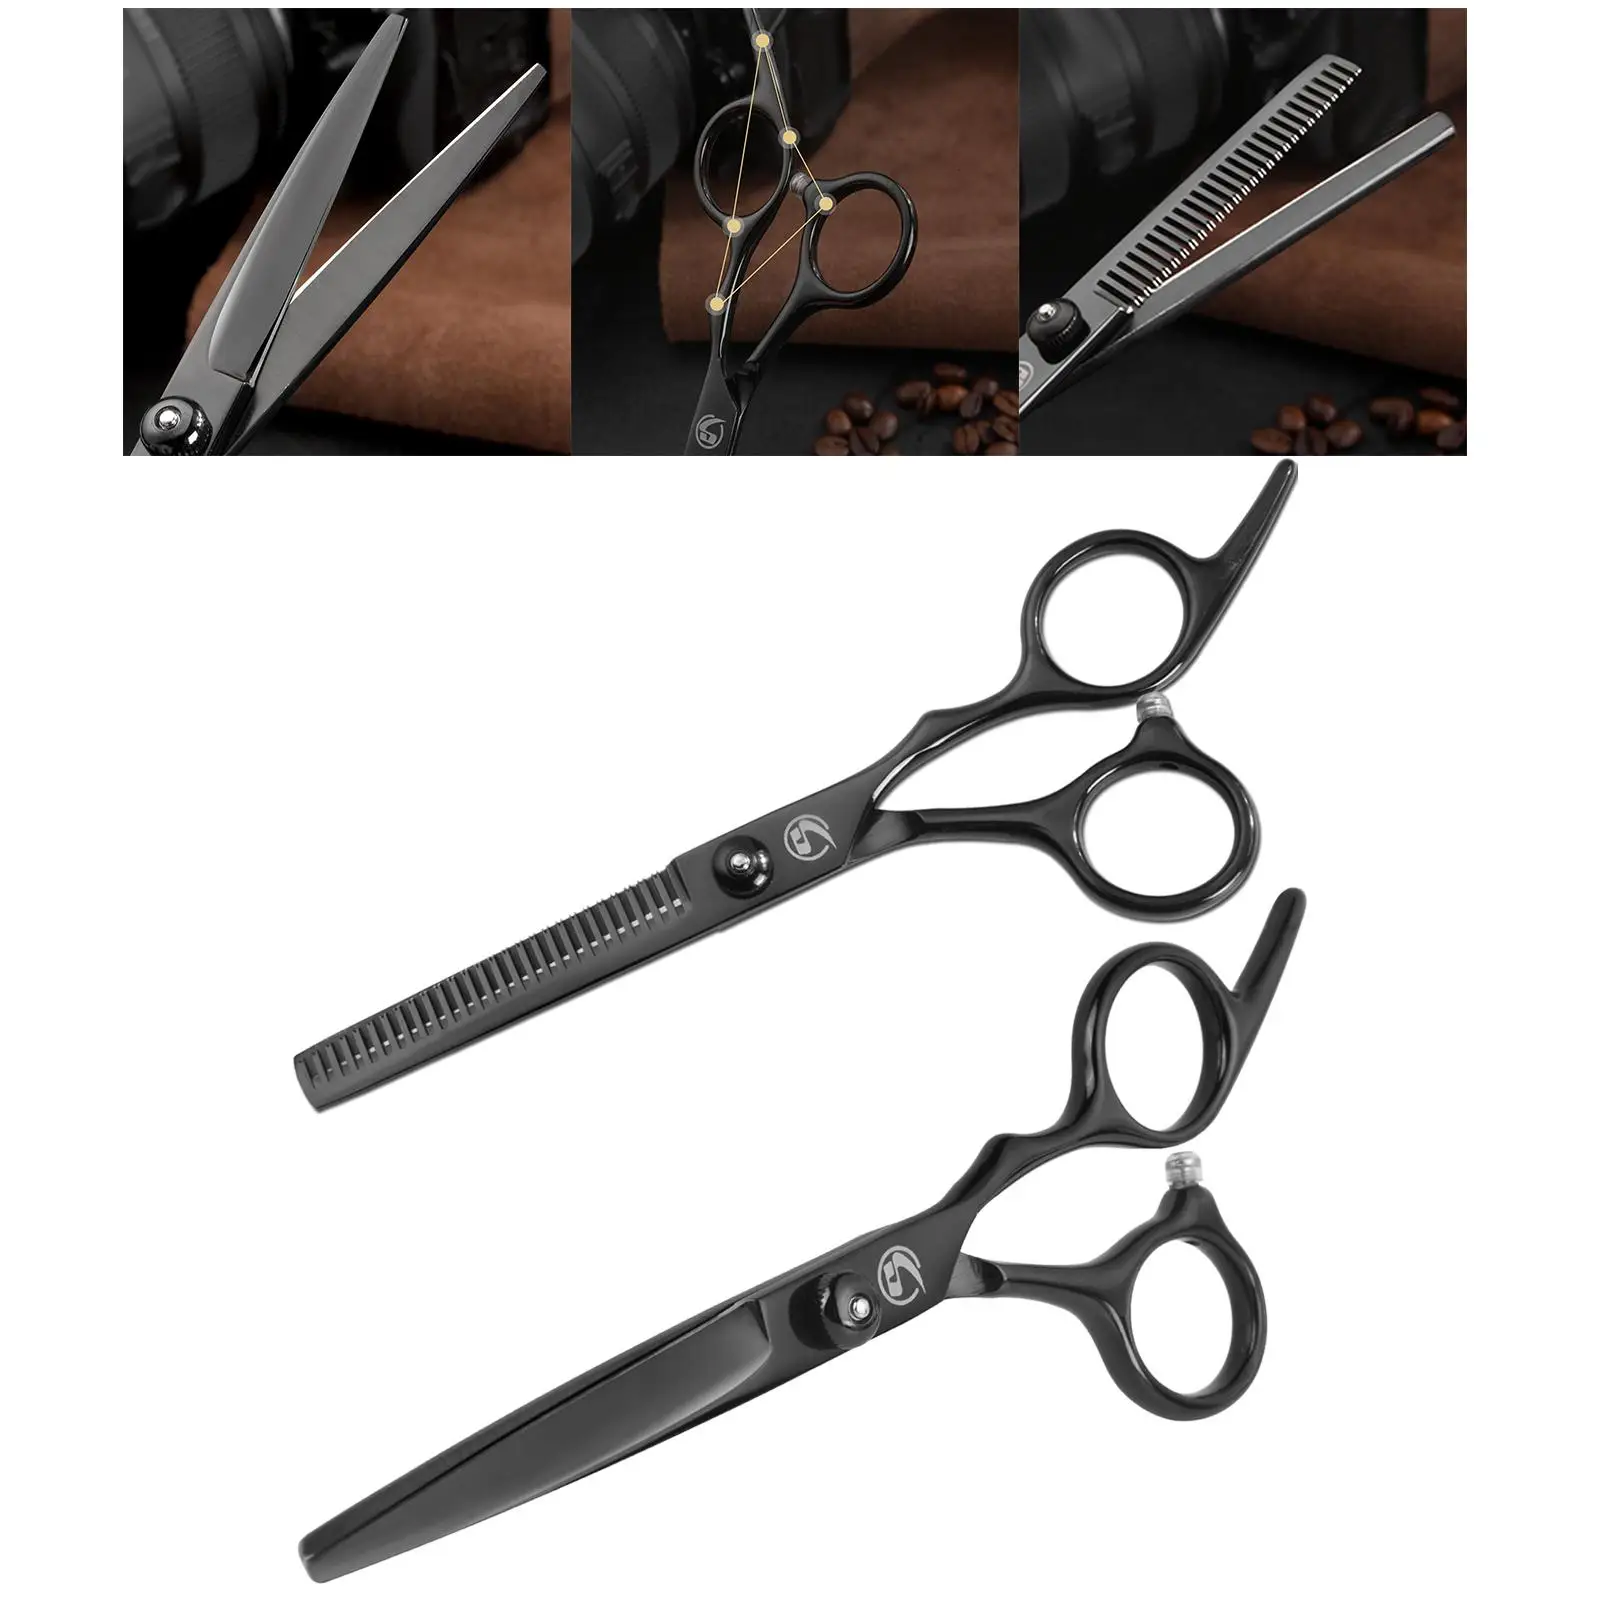 Hairdressing Scissors and Thinning Shears, Easy to Use Adjustable Screw Durable Material